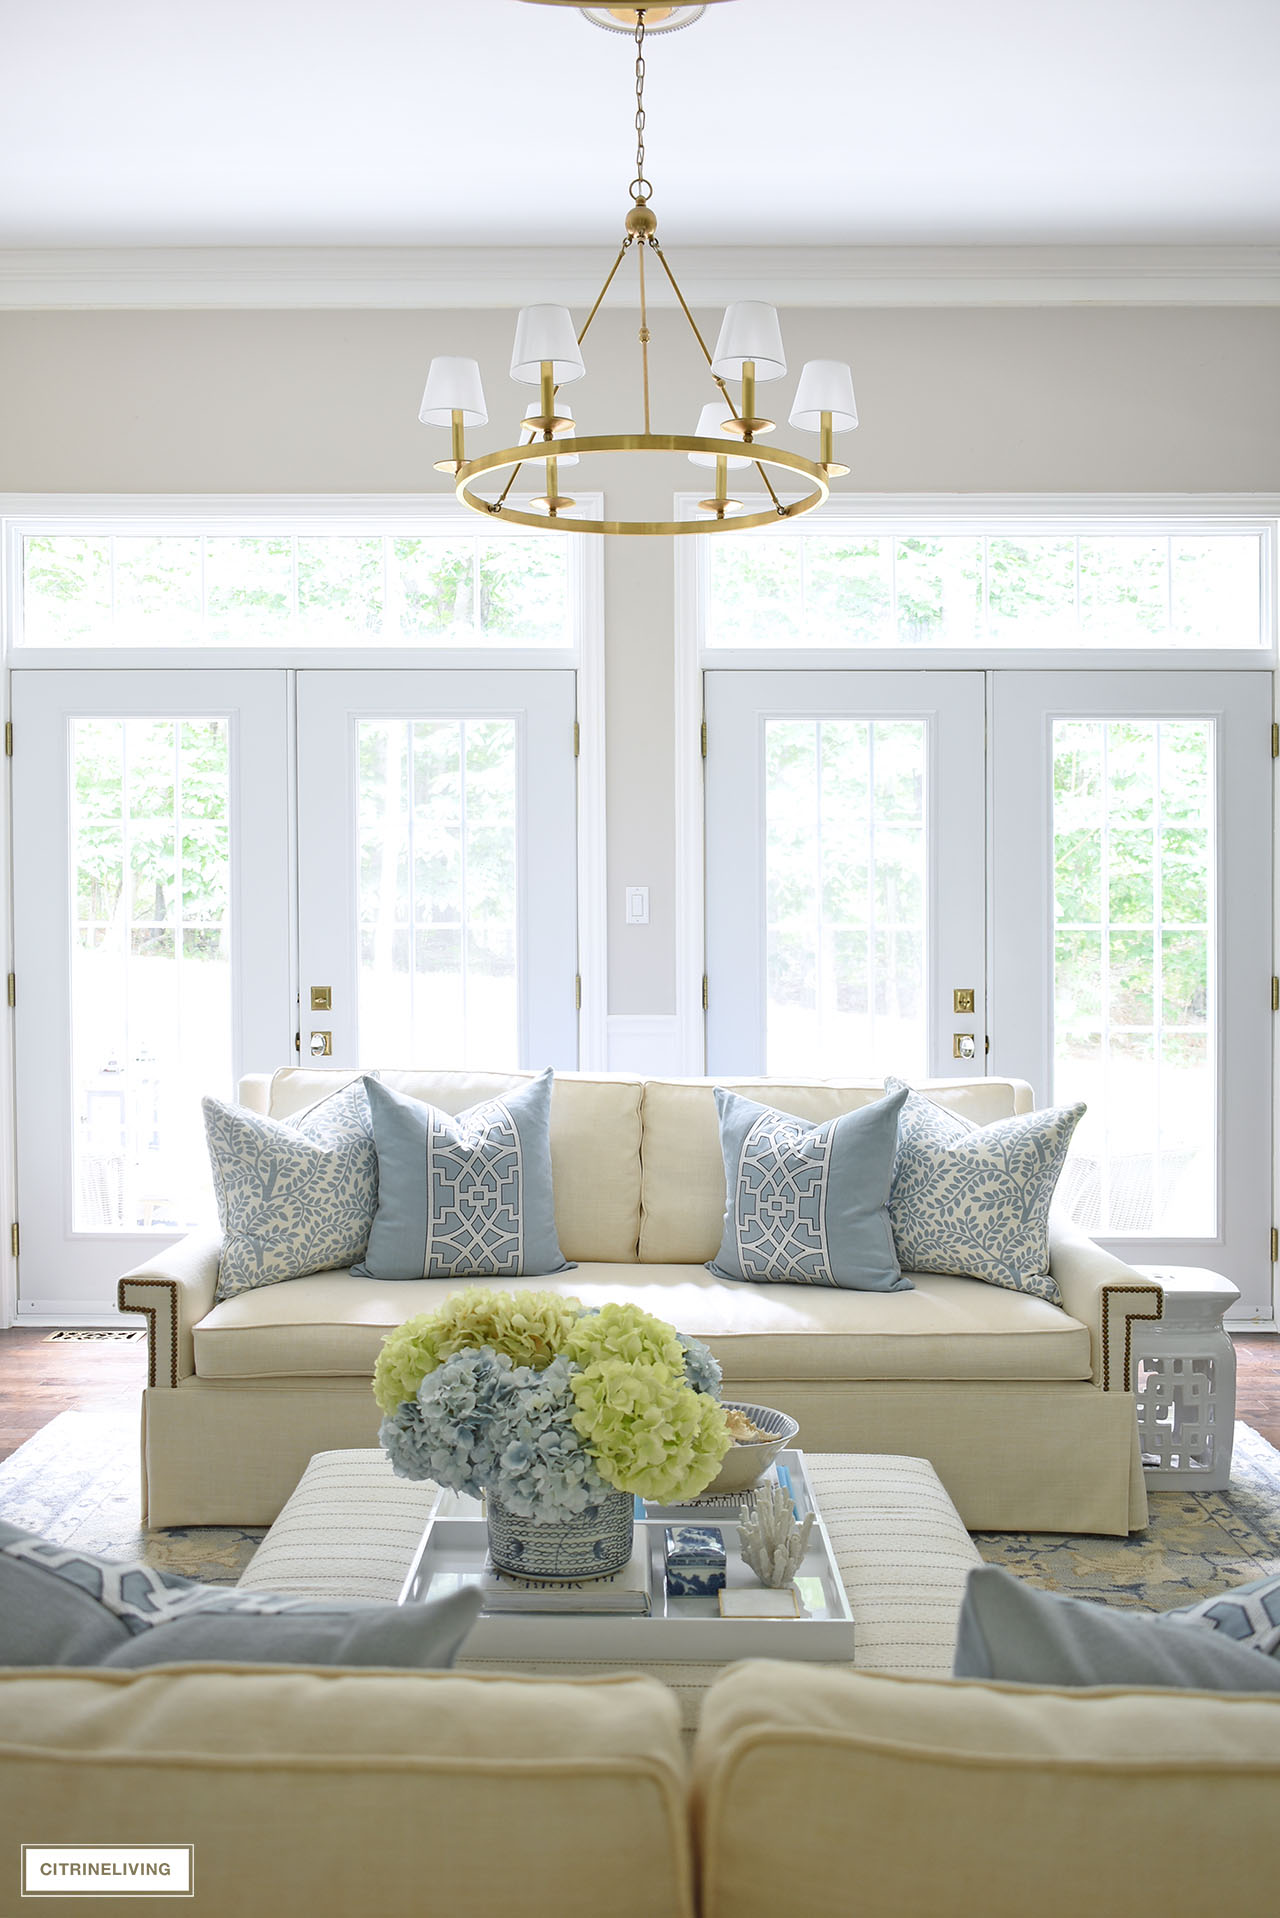 Beautiful living room with white sofa, blue and white decor, brass chandelier and double french doors with transoms.